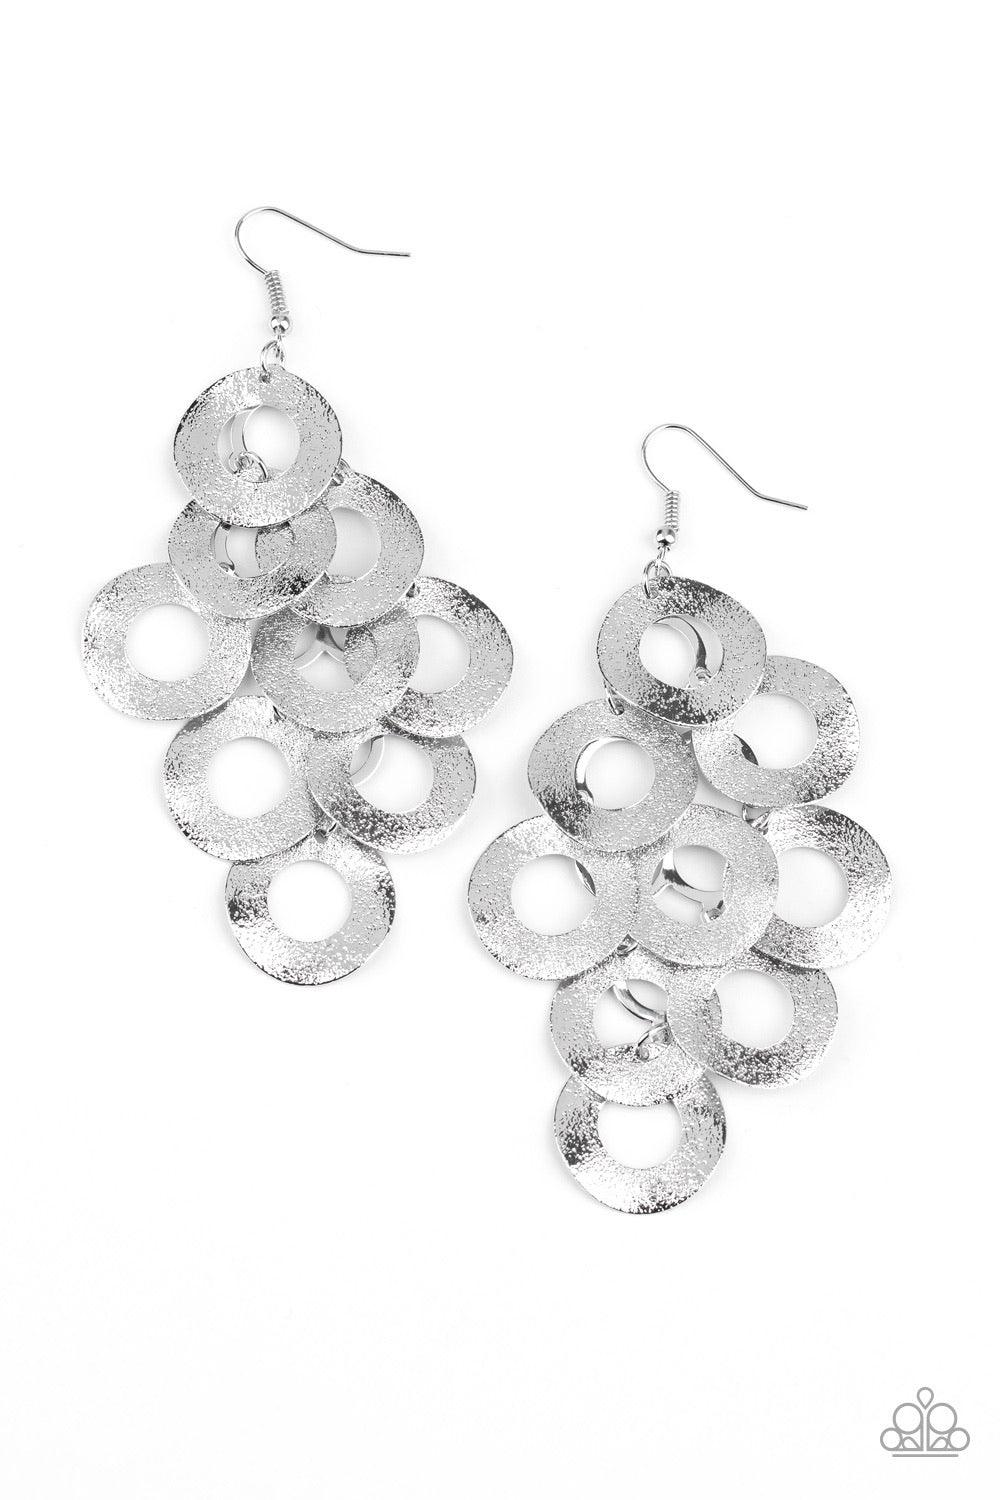 Paparazzi Accessories Scattered Shimmer - Silver Delicately hammered in light-catching shimmer, rows of curved silver hoops delicately overlap into a noise-making lure. Earring attaches to a standard fishhook fitting. Sold as one pair of earrings. Jewelry